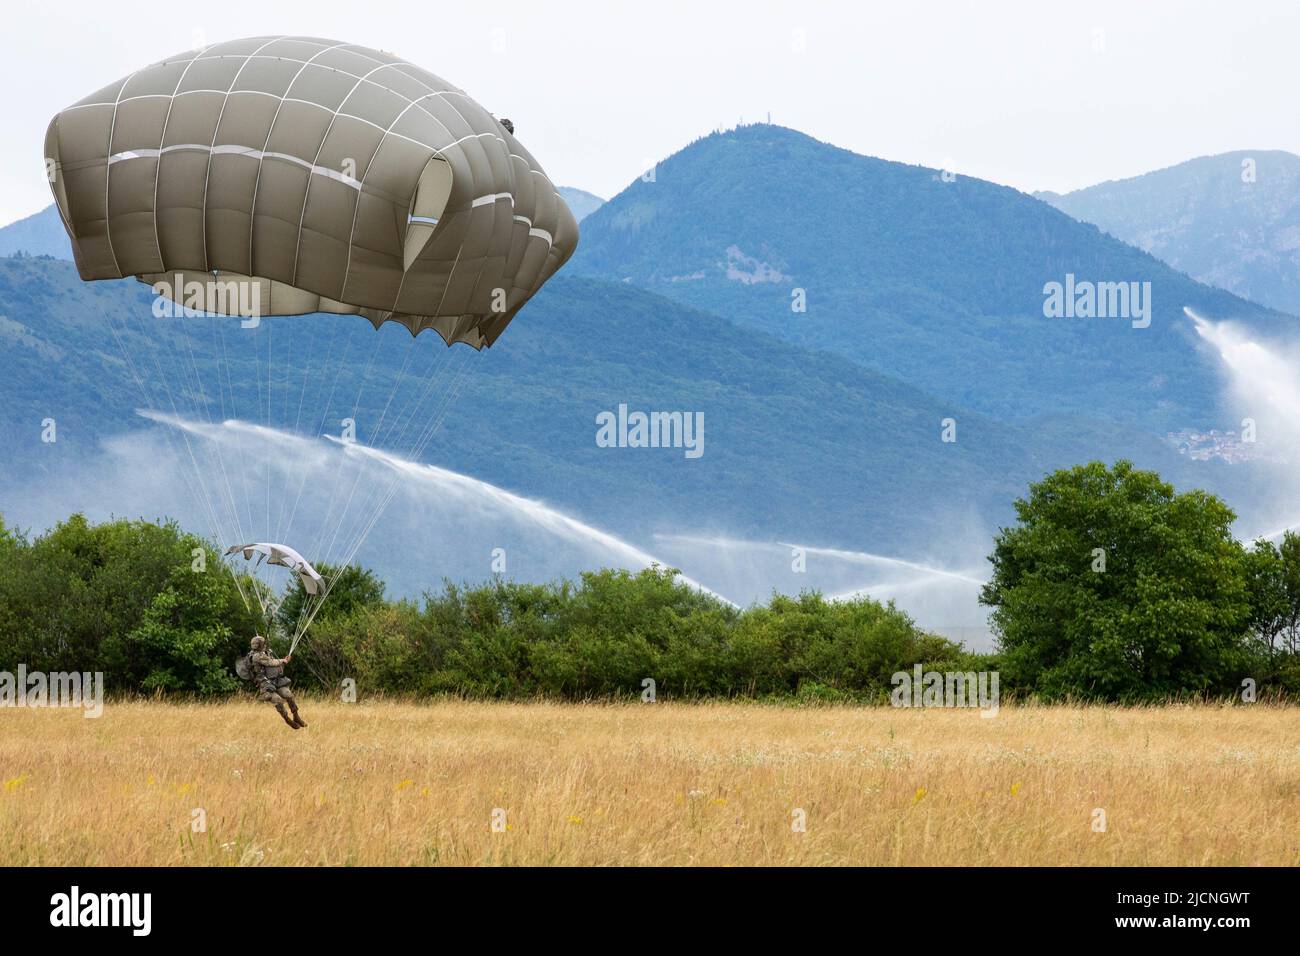 U.S. Army paratroopers with the 173rd Brigade Support Battalion, 173rd Airborne Brigade, exit a CH-47 Chinook during an airborne operation at Juliet Drop Zone, Italy, June 9, 2022. Families of the paratroopers were invited to witness their jump. The 173rd Airborne Brigade is the U.S. Army's Contingency Response Force in Europe, providing rapidly deployable forces to the United States European, African, and Central Command areas of responsibility. Forward deployed across Italy and Germany, the brigade routinely trains alongside NATO allies and partners to build partnerships and strengthen the a Stock Photo